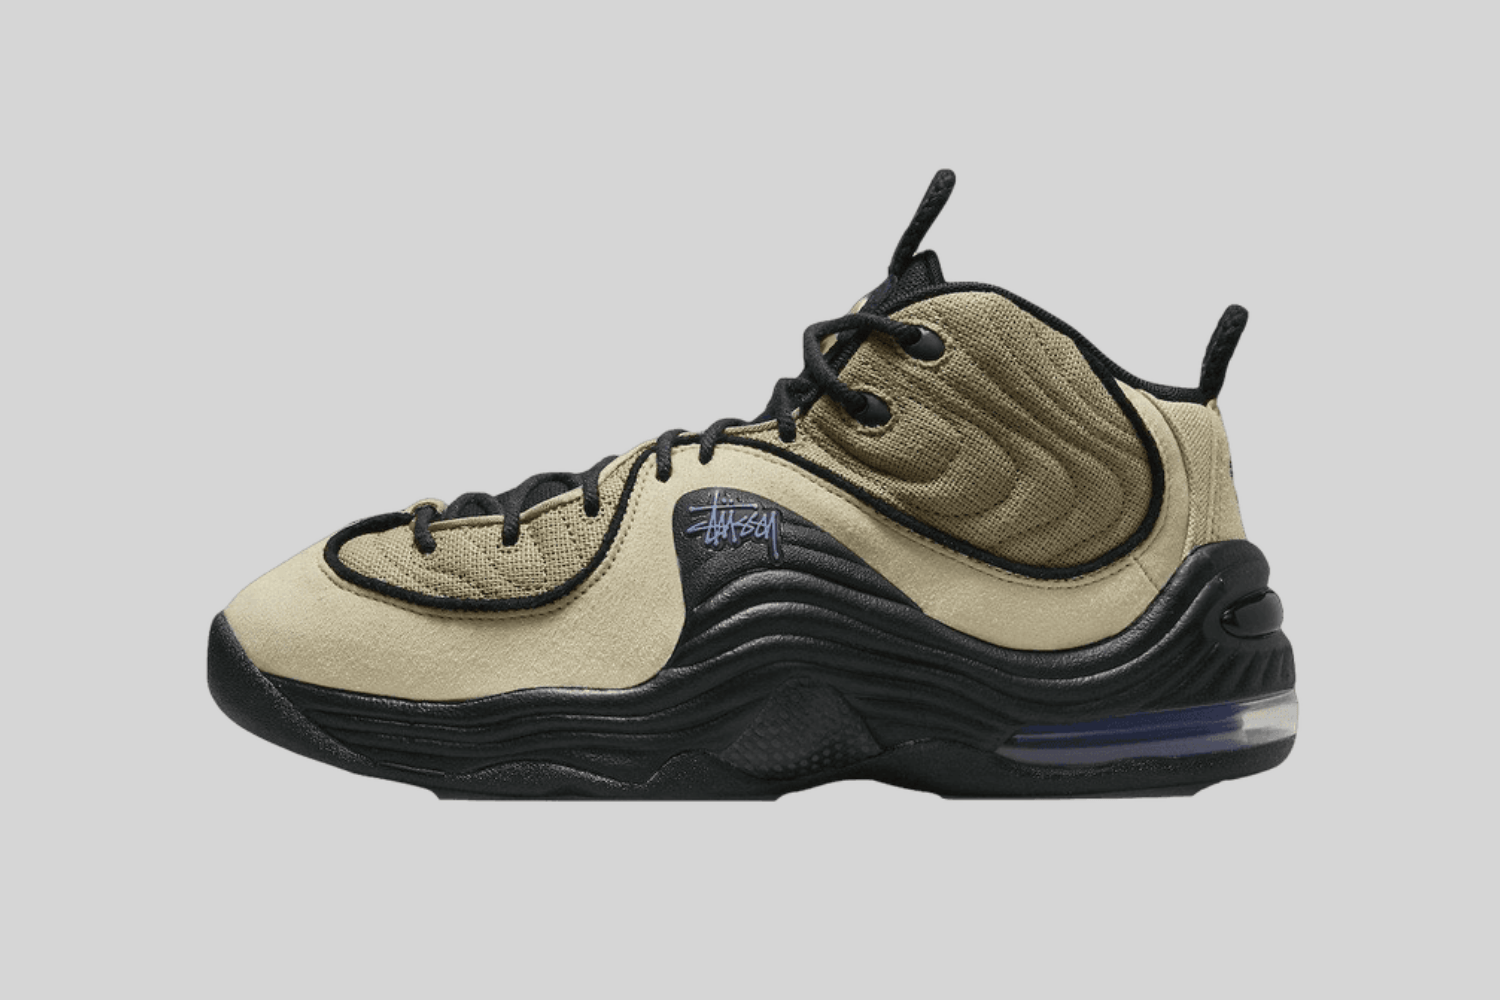 Nike x Stüssy arrives with 3rd Air Penny 'Fossil'